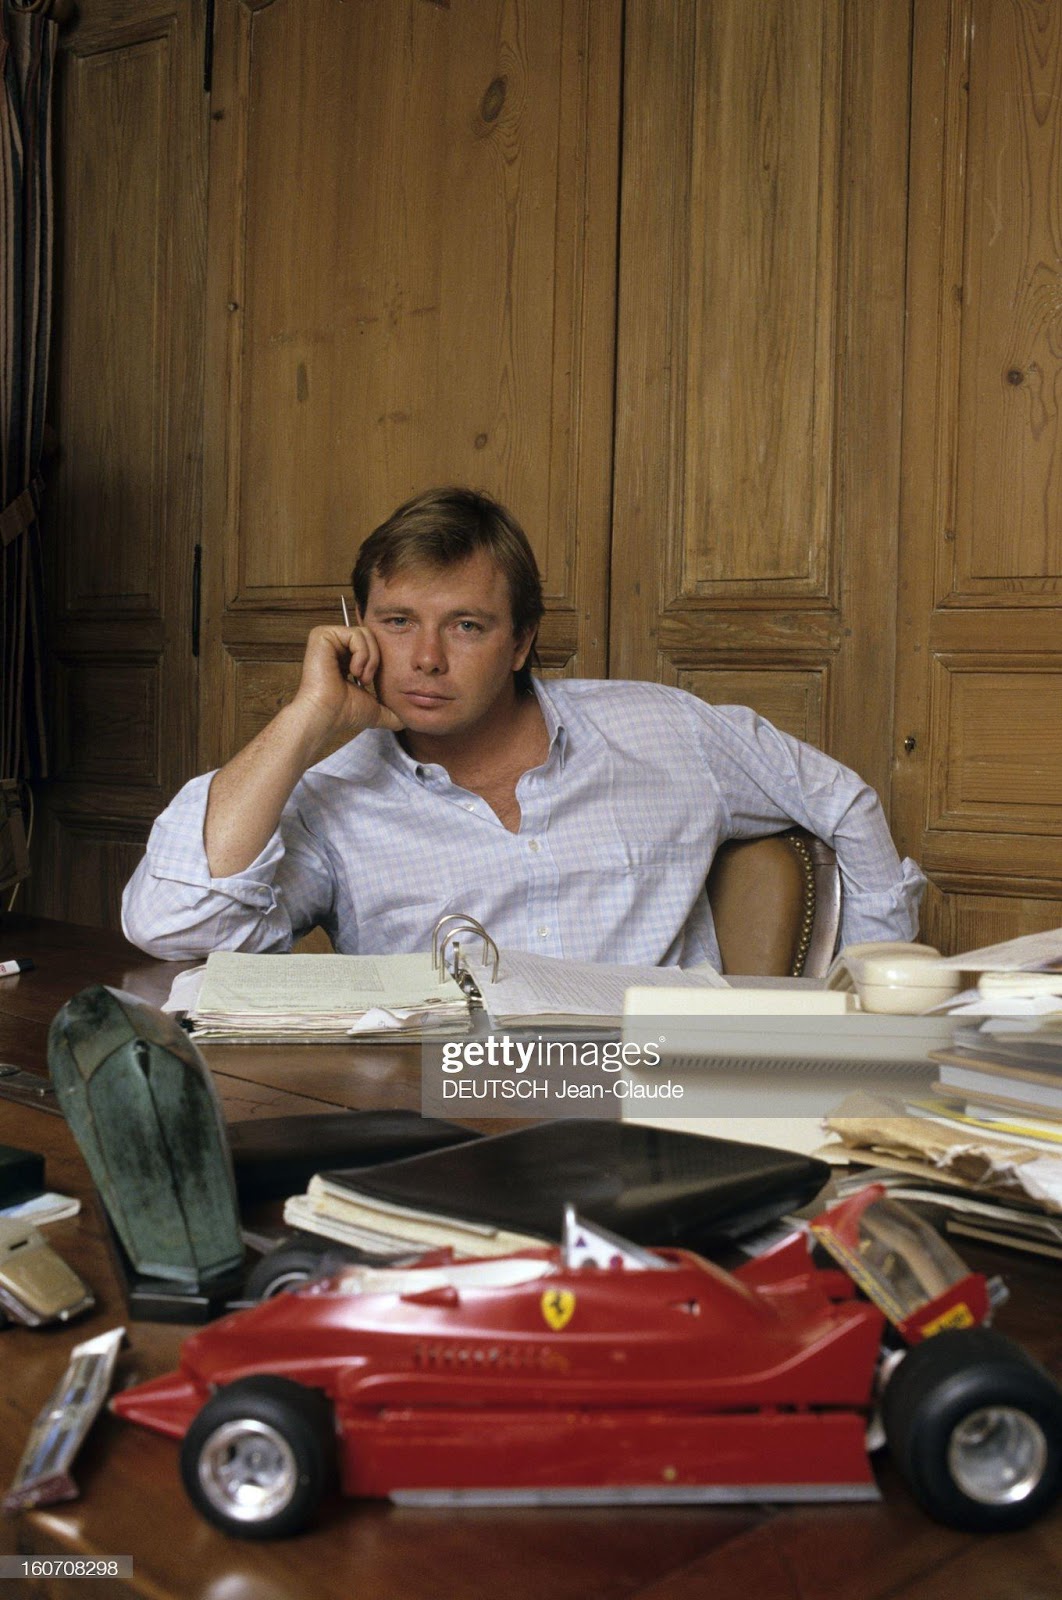 Didier Pironi at home, sitting at his desk, a miniature Ferrari car in the foreground.